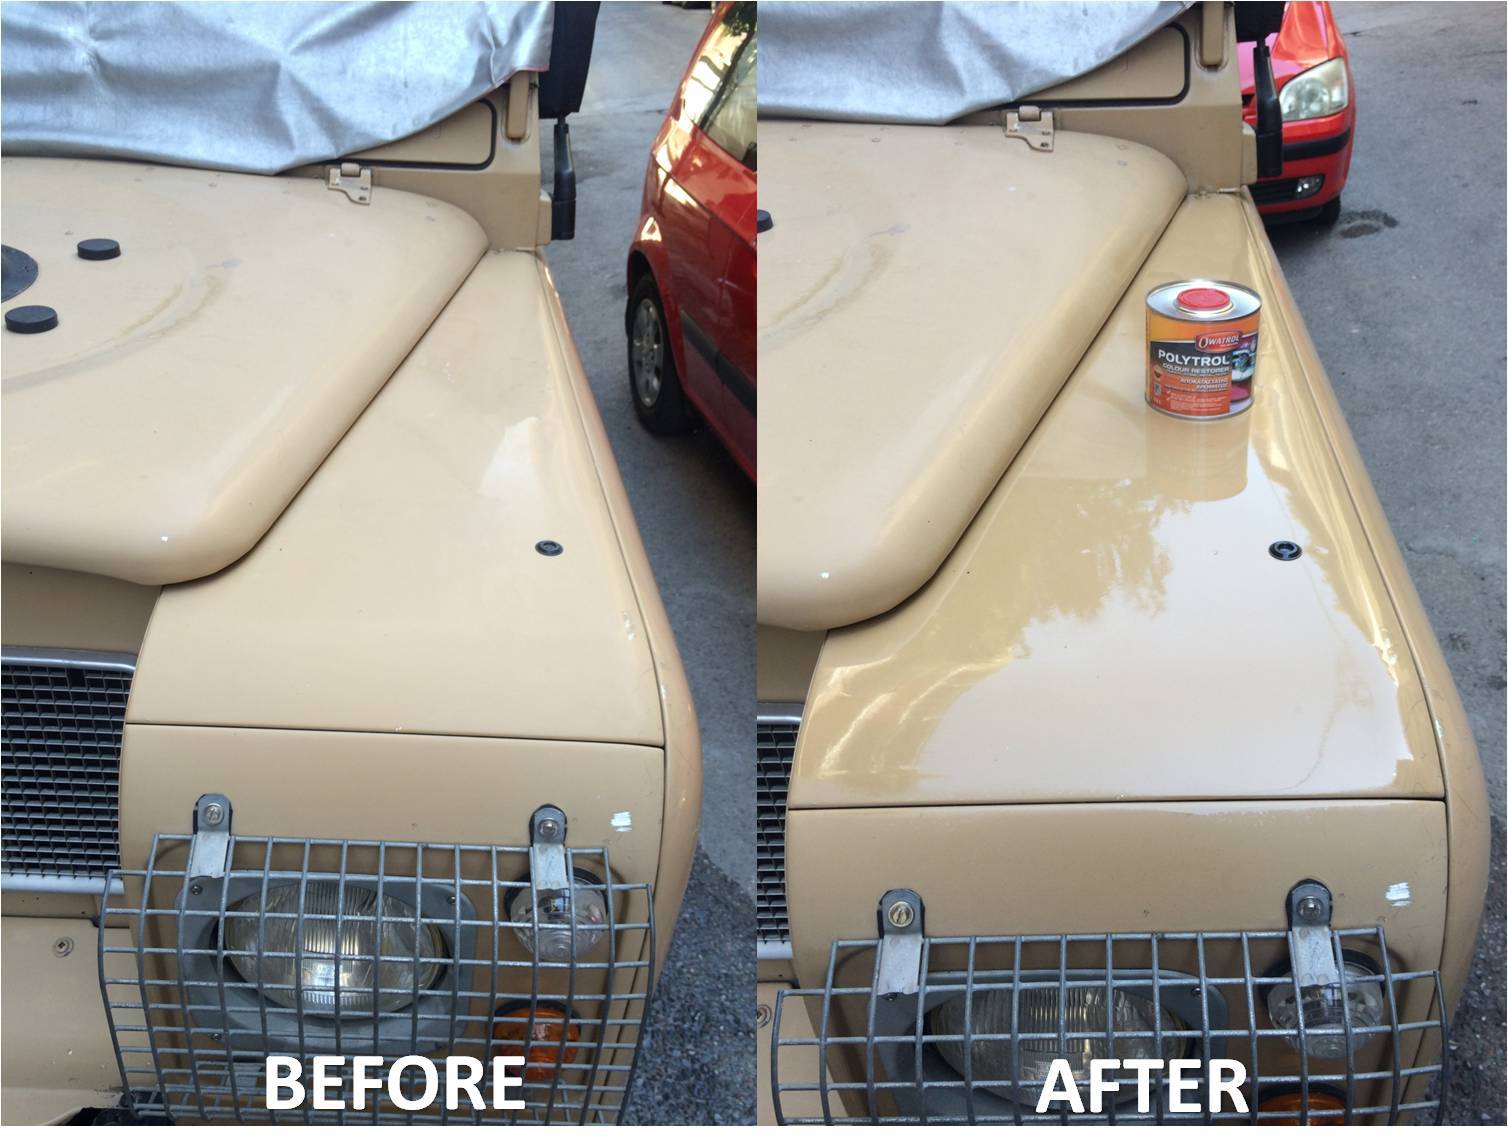 Land Rover before and after application of Polytrol